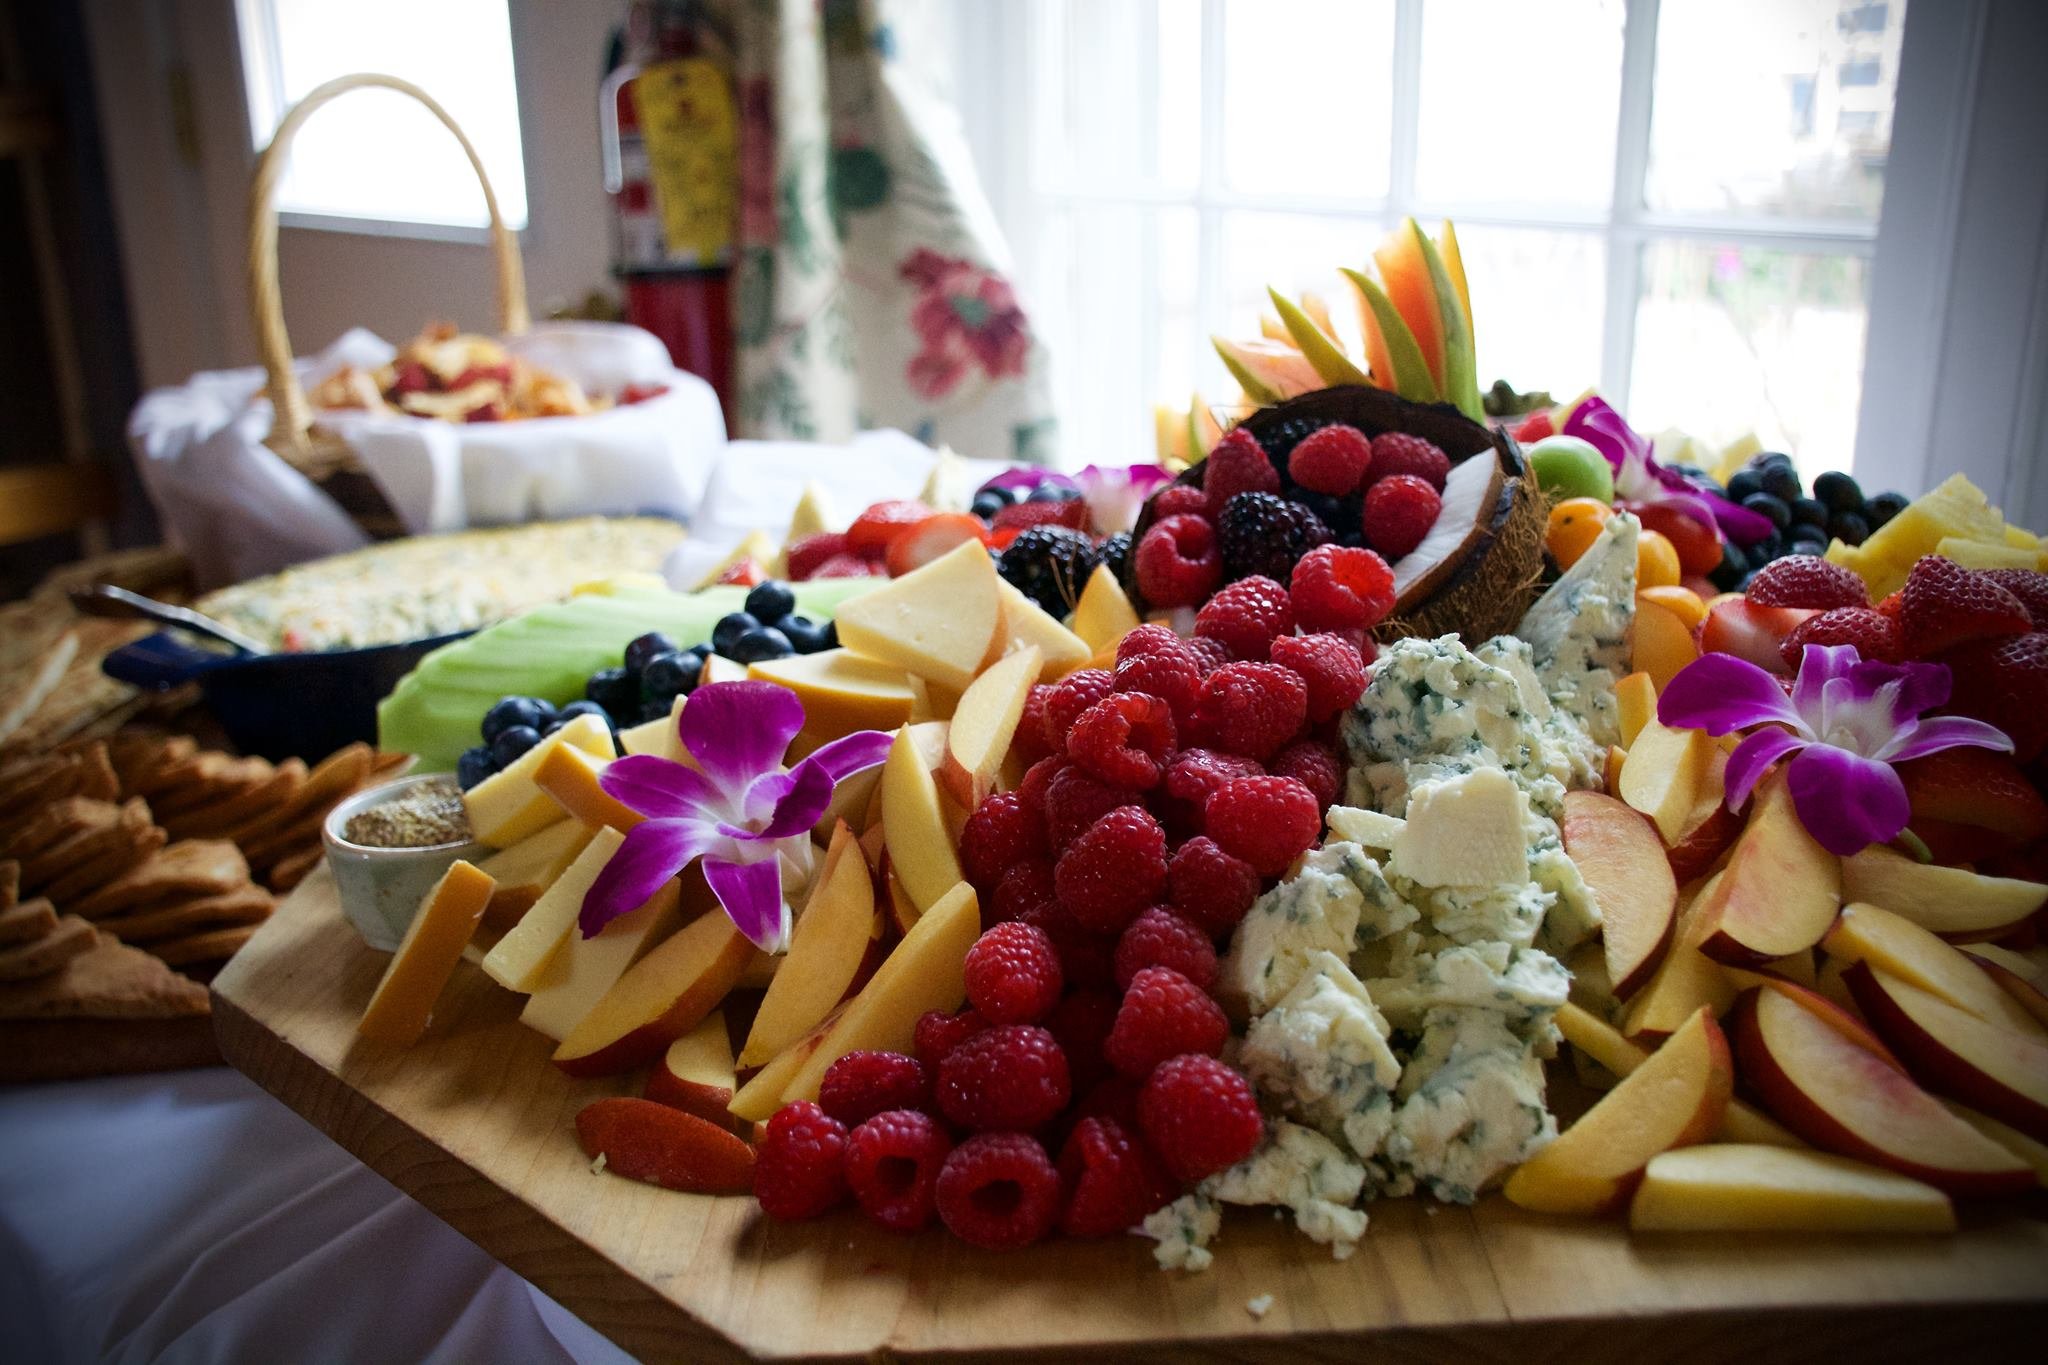  The Dowds' Country Inn   Catering for Intimate Private Gatherings    Guestrooms   Extended Stays   Private Events  